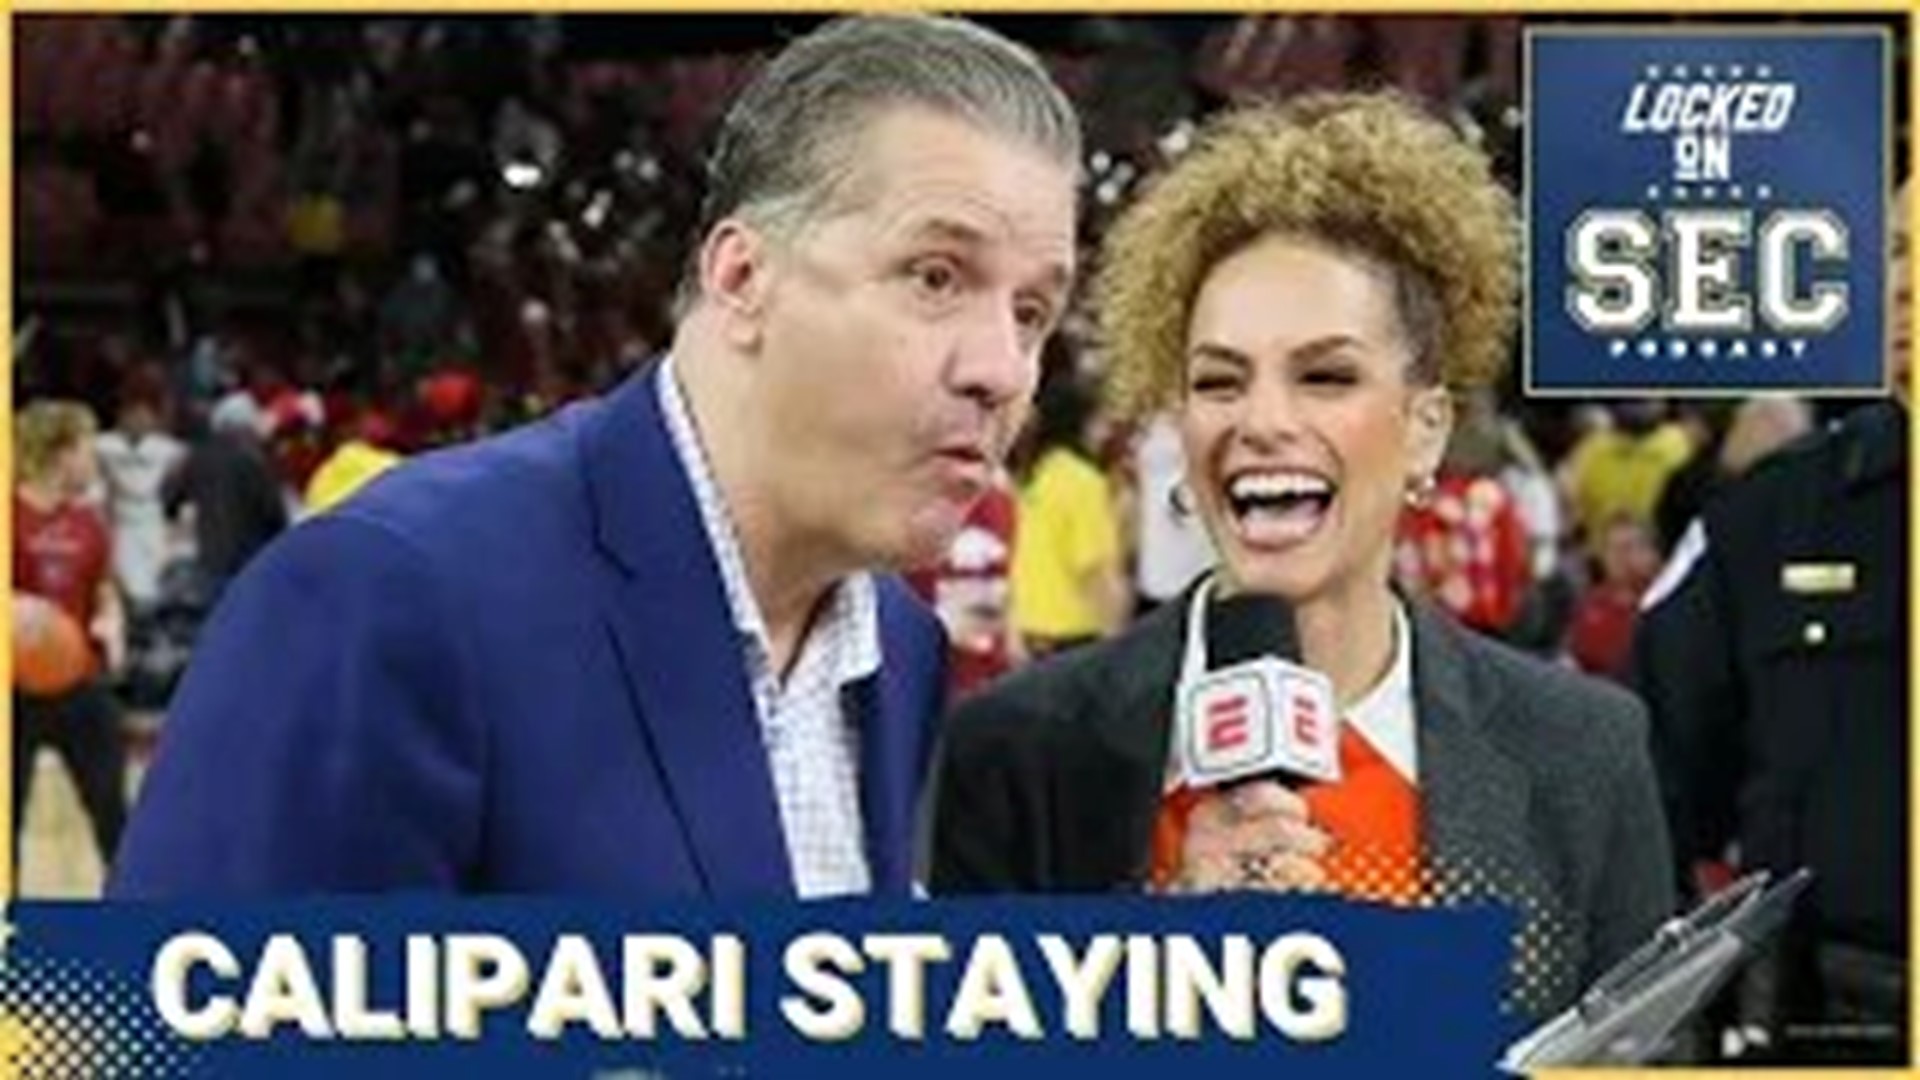 On today's show, we discuss John Calipari staying put in Lexington, getting another chance to turn things around for the Kentucky Wildcats.